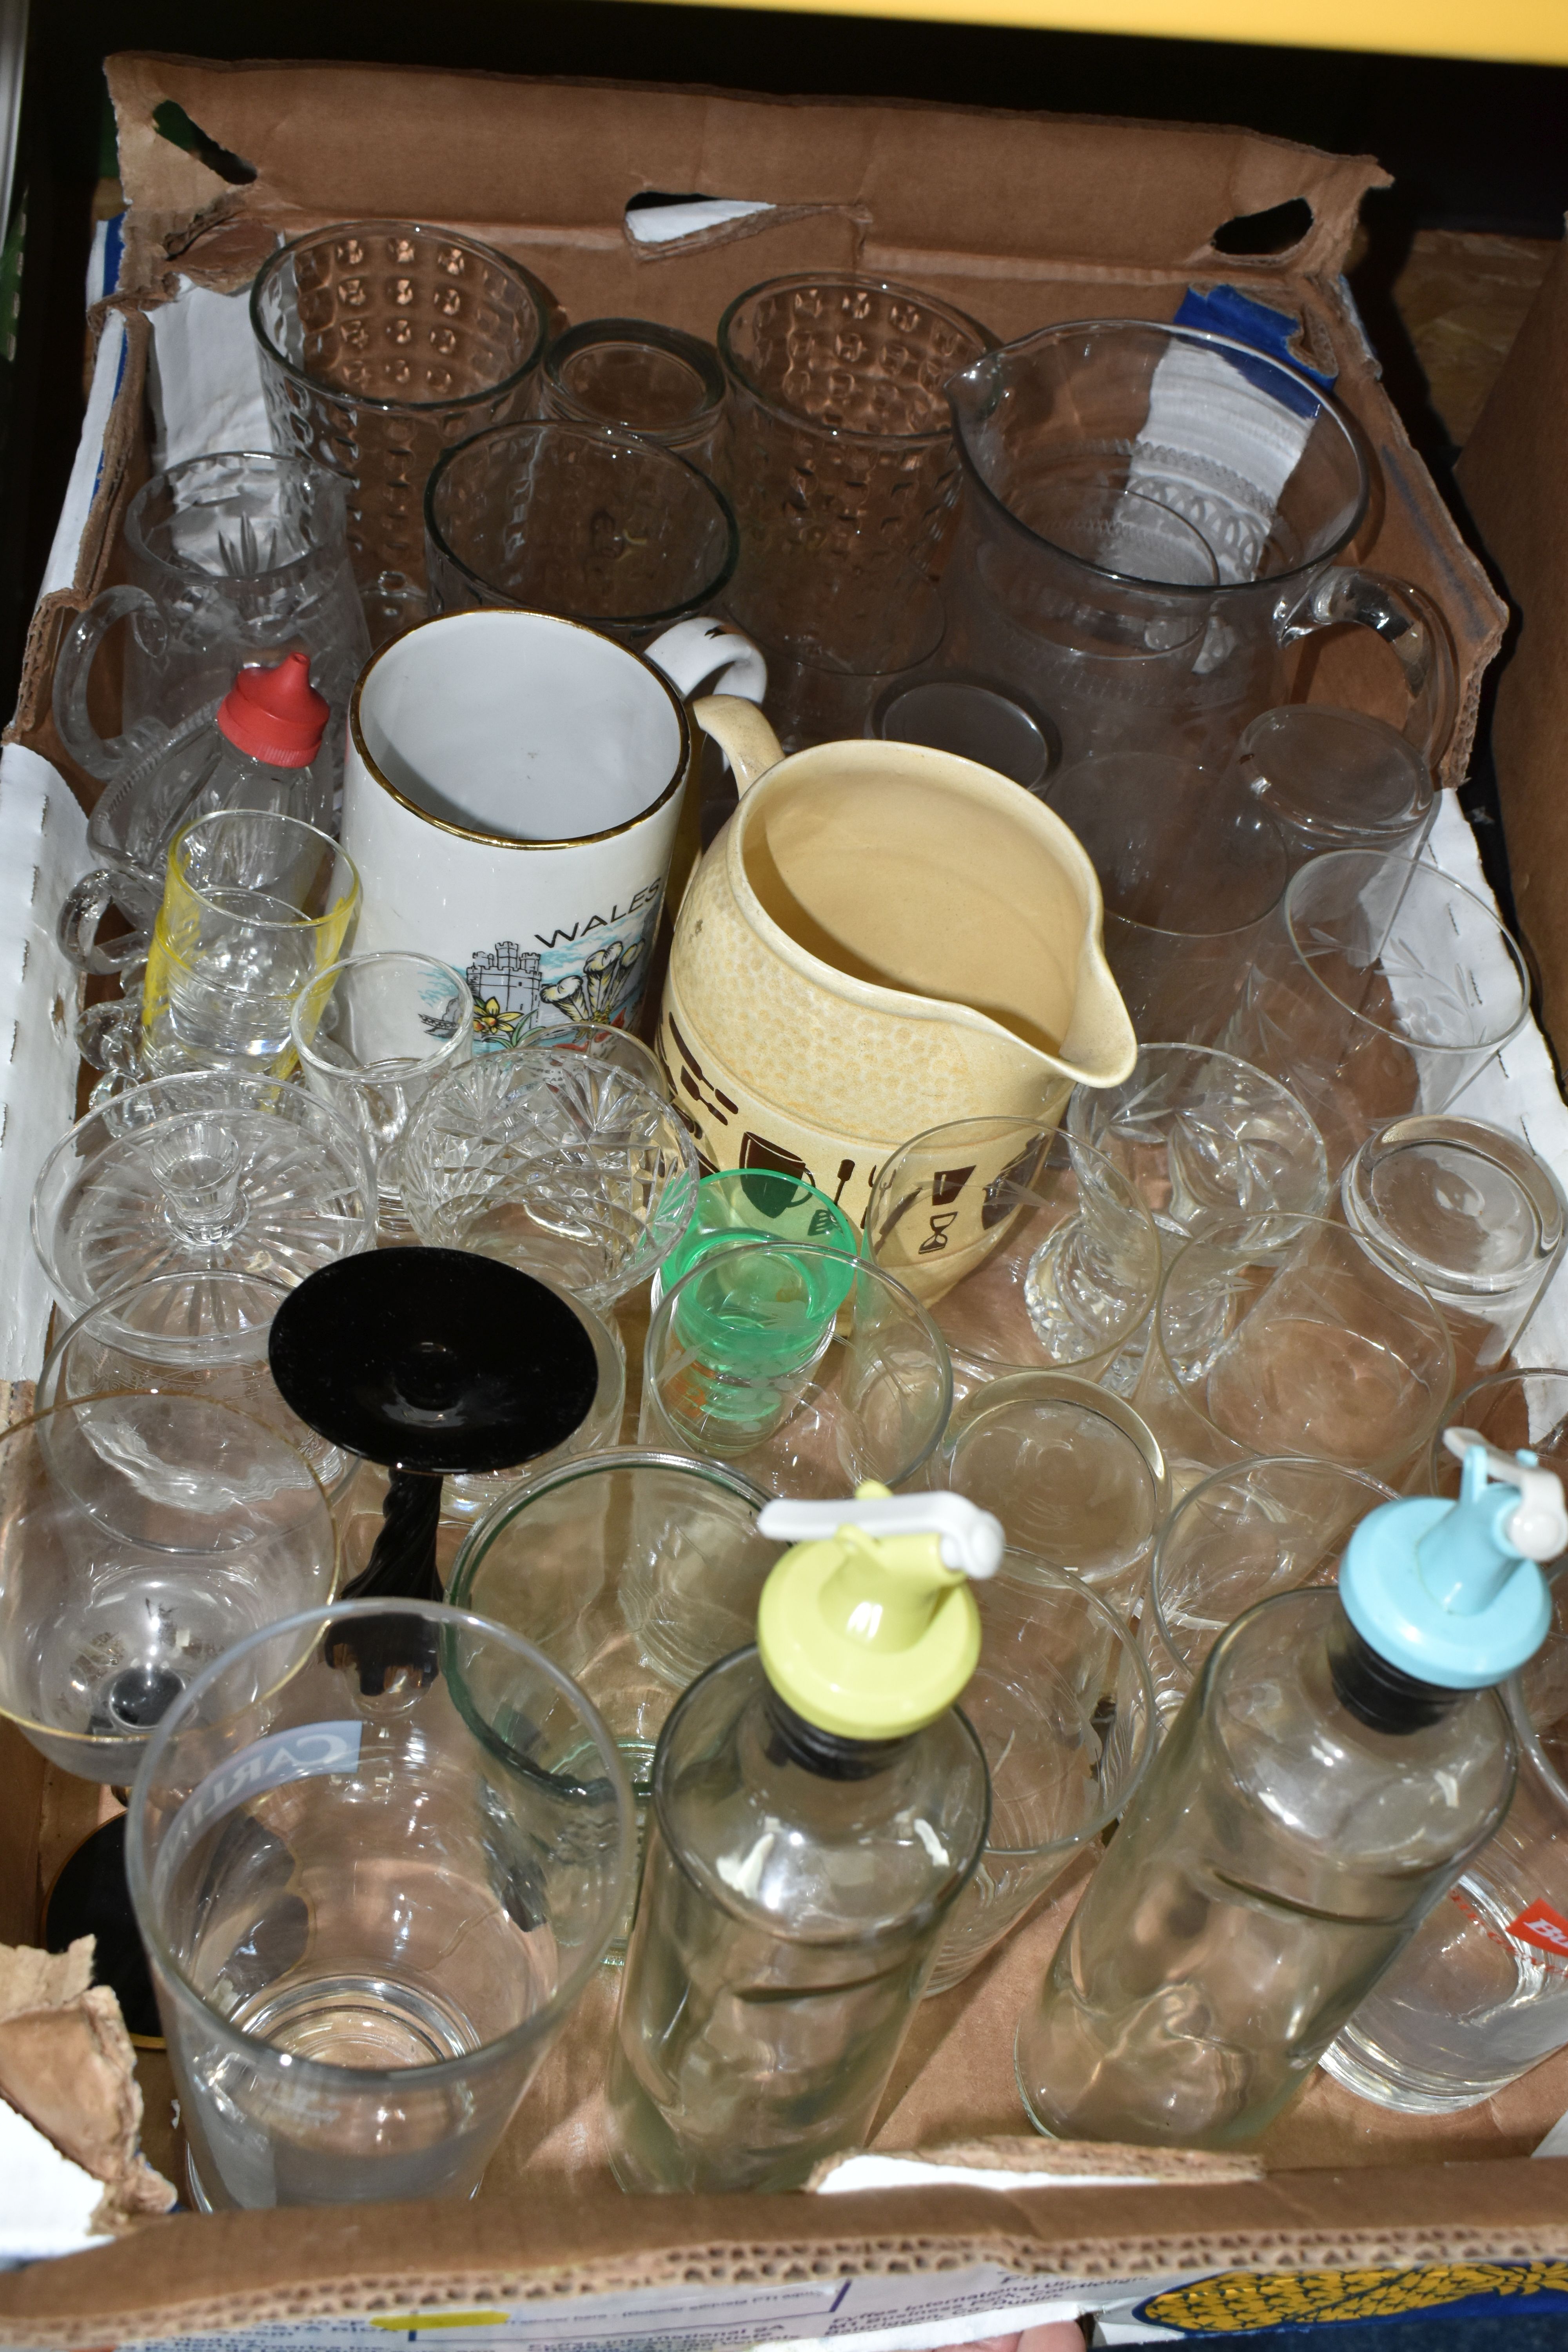 FIVE BOXES AND LOOSE CERAMICS, GLASS, CUTLERY AND KITCHEN WARE, to include a Moulinex food processor - Image 5 of 7